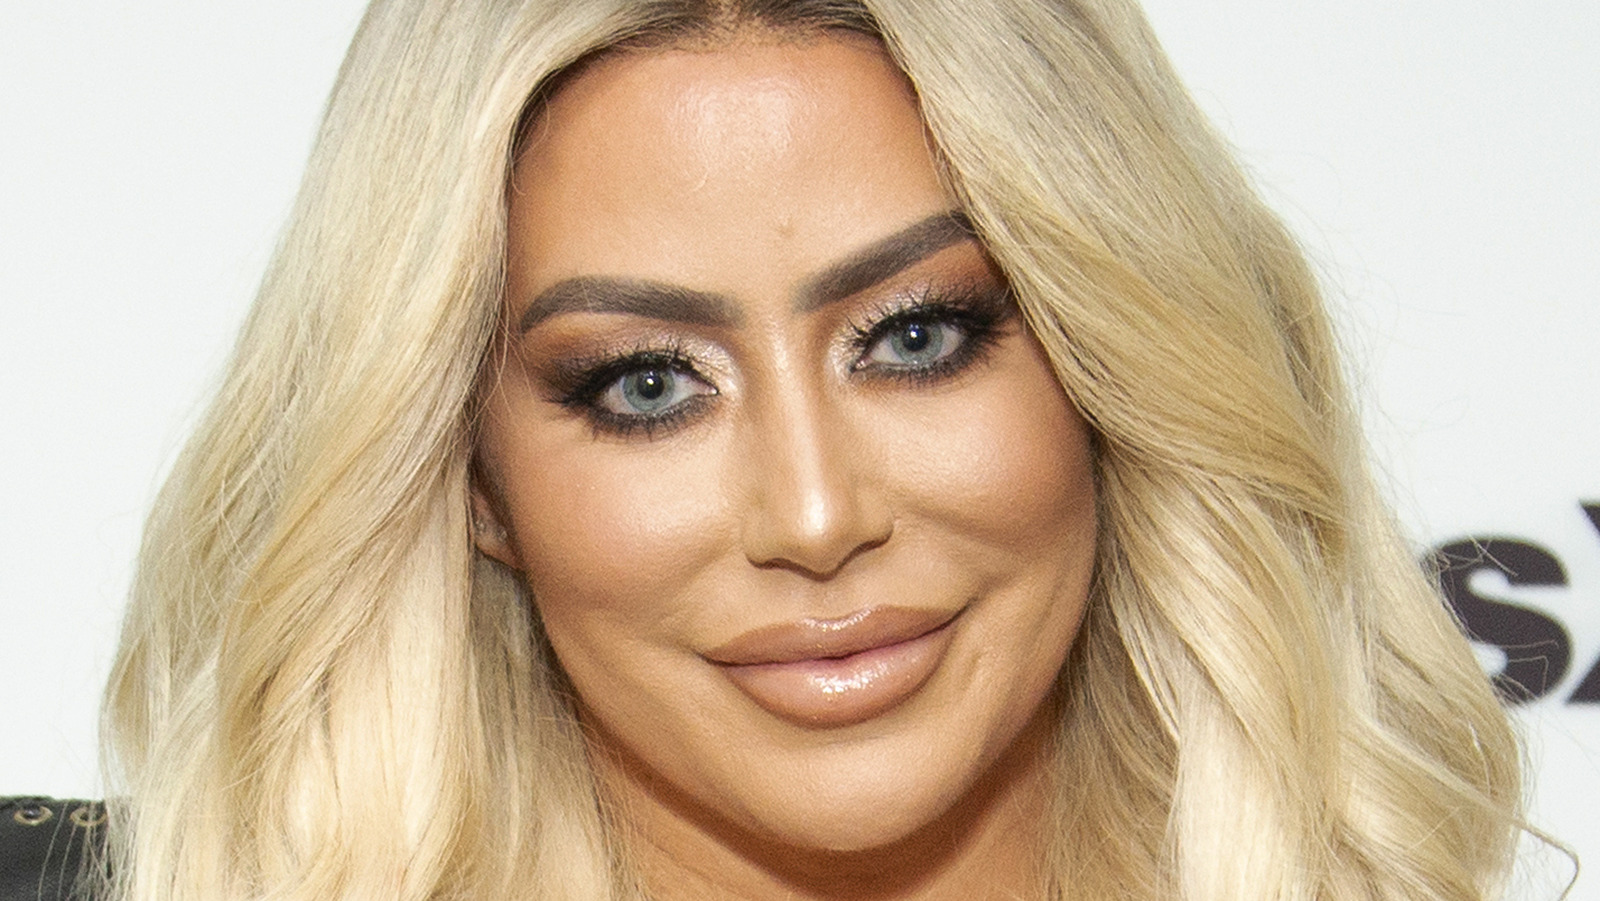 Aubrey O'Day Continues To Defend Her Divisive Habits